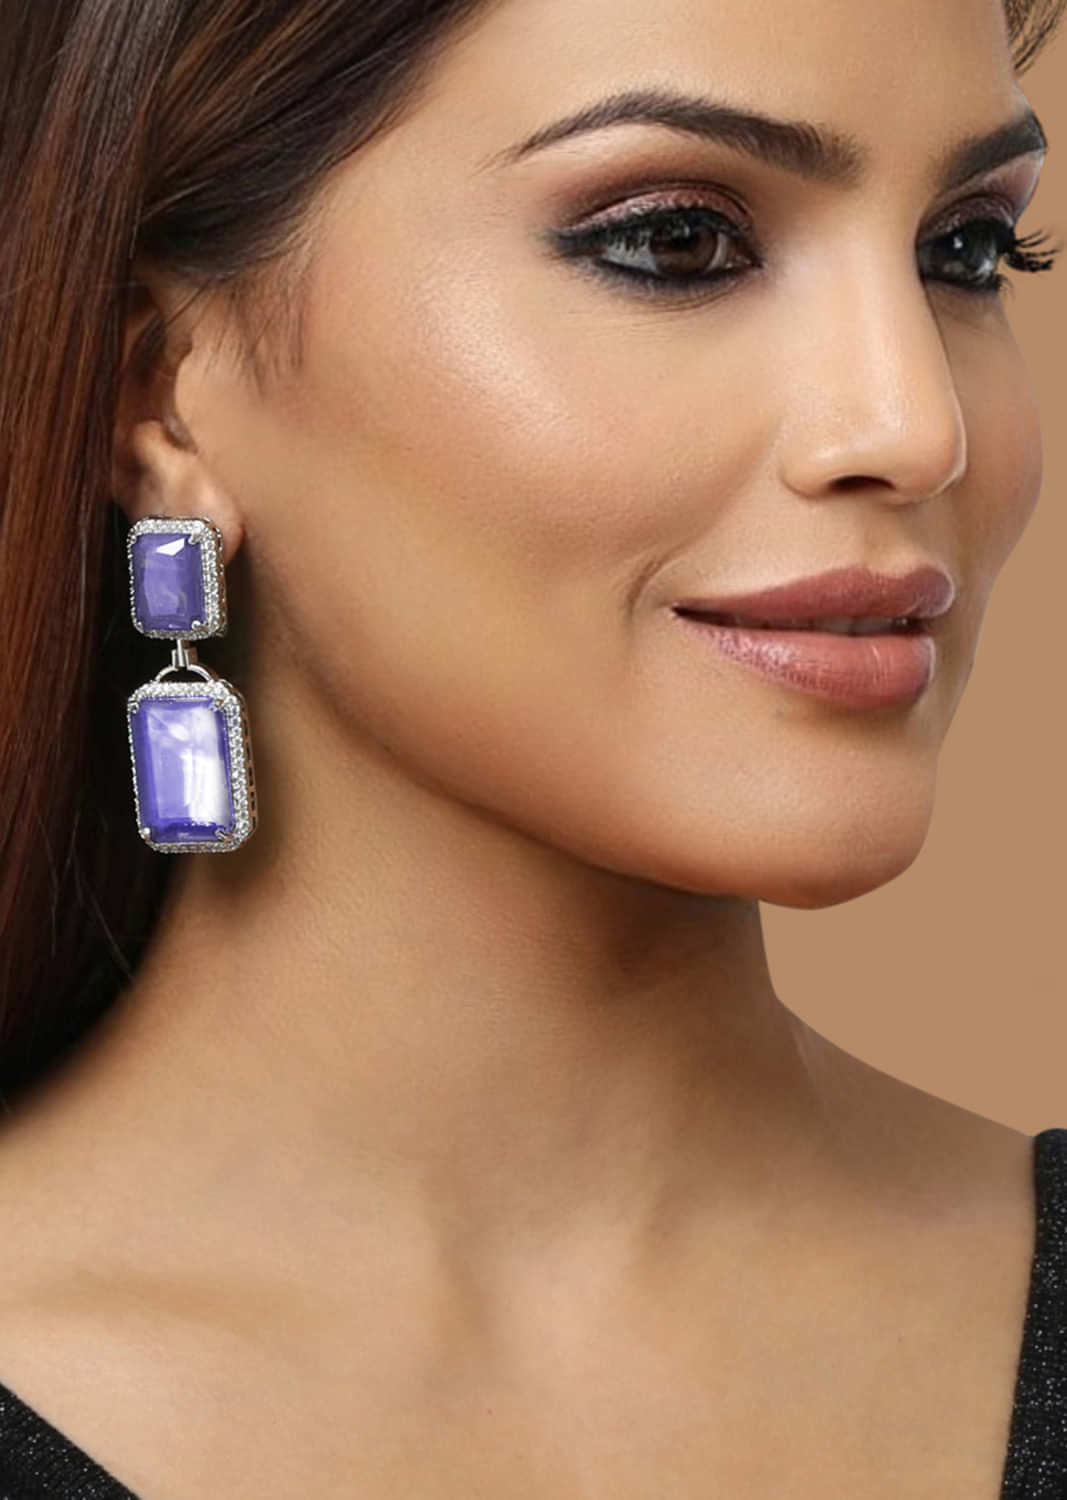 2 Lavender Stones Dangled Earrings With Faux Diamonds